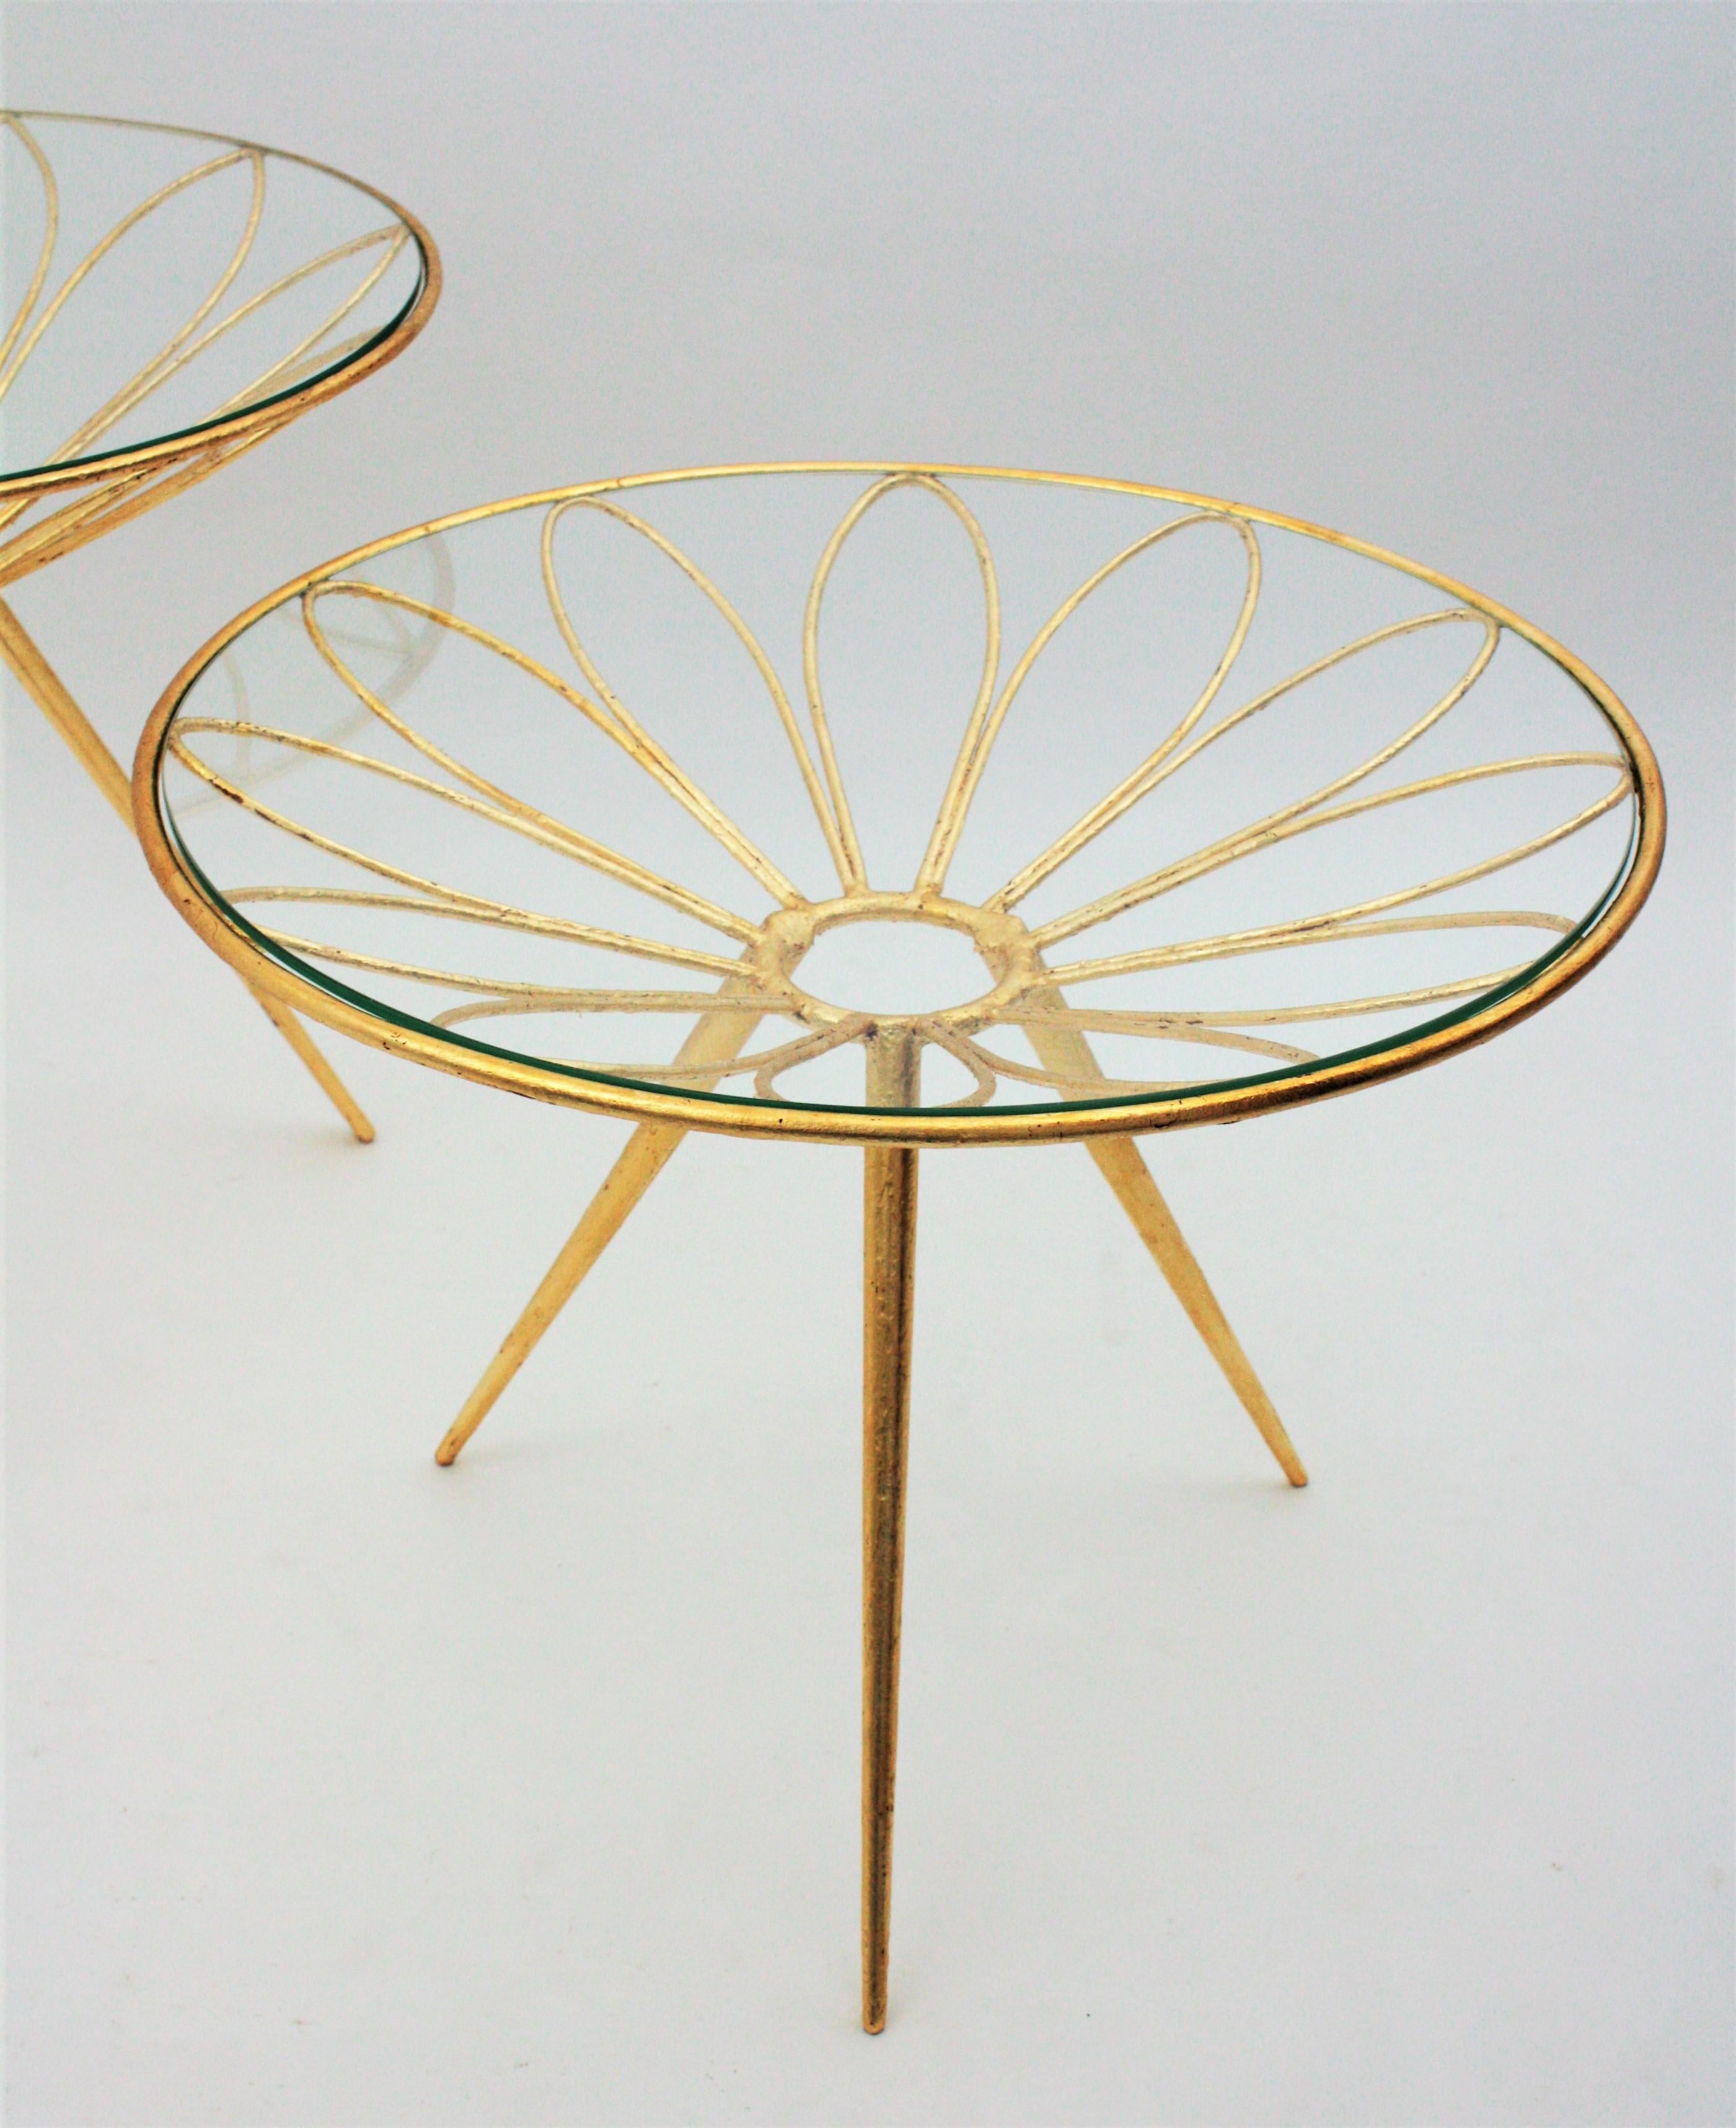 French Side Tables in Gilt Iron Daisy Flower Design, 1950s For Sale 4